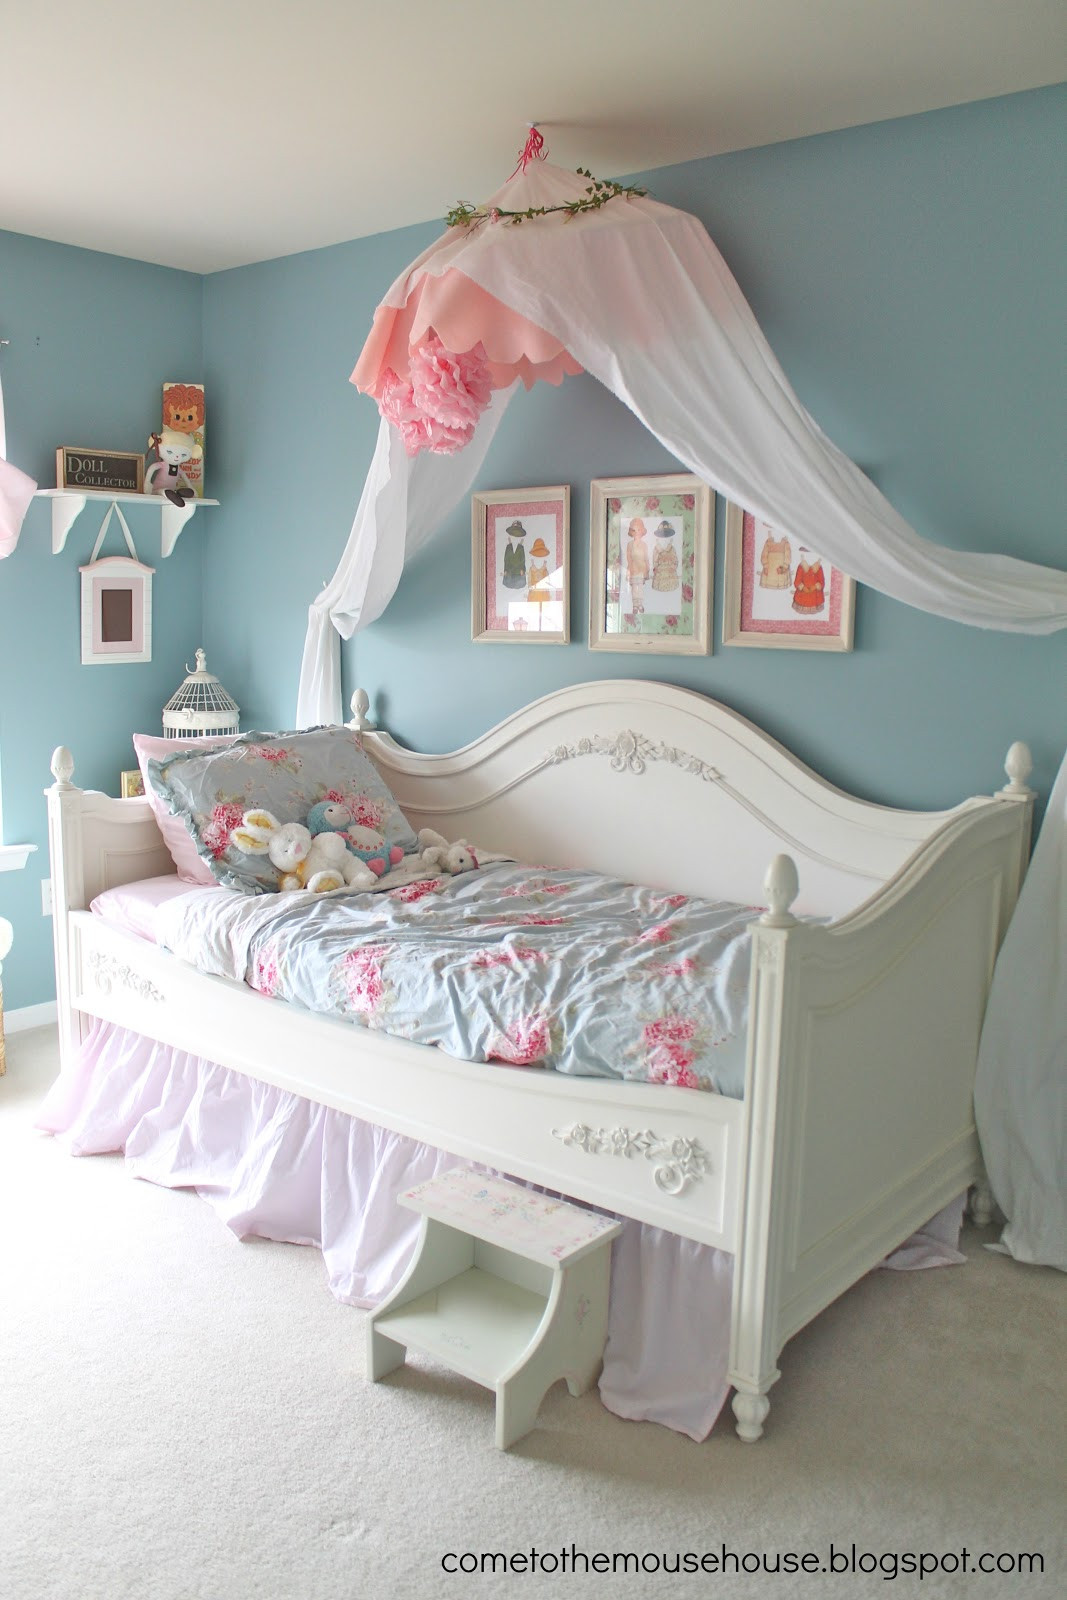 Images Of Shabby Chic Bedrooms
 Shabby Chic Bedroom Reveal wel etothemousehouse